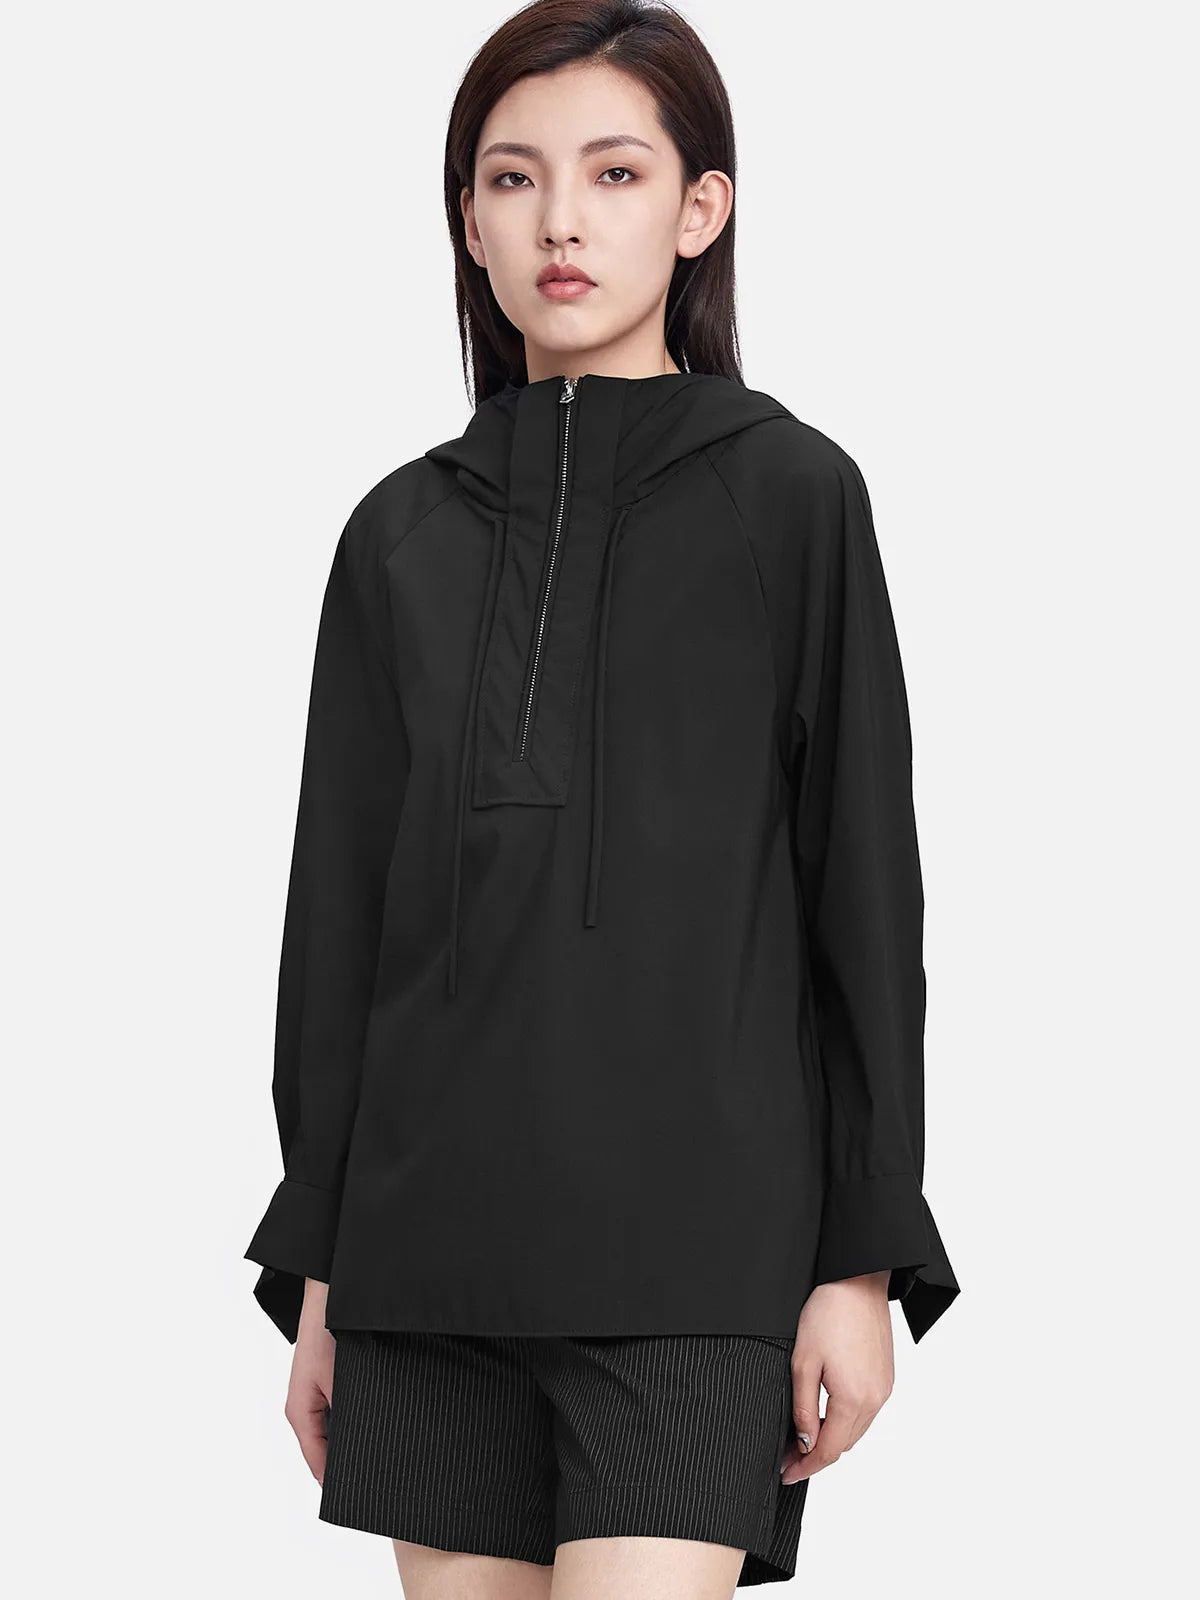 Casual Drawstring High Neck Cap Pleated Stitching Long Sleeve Shirt